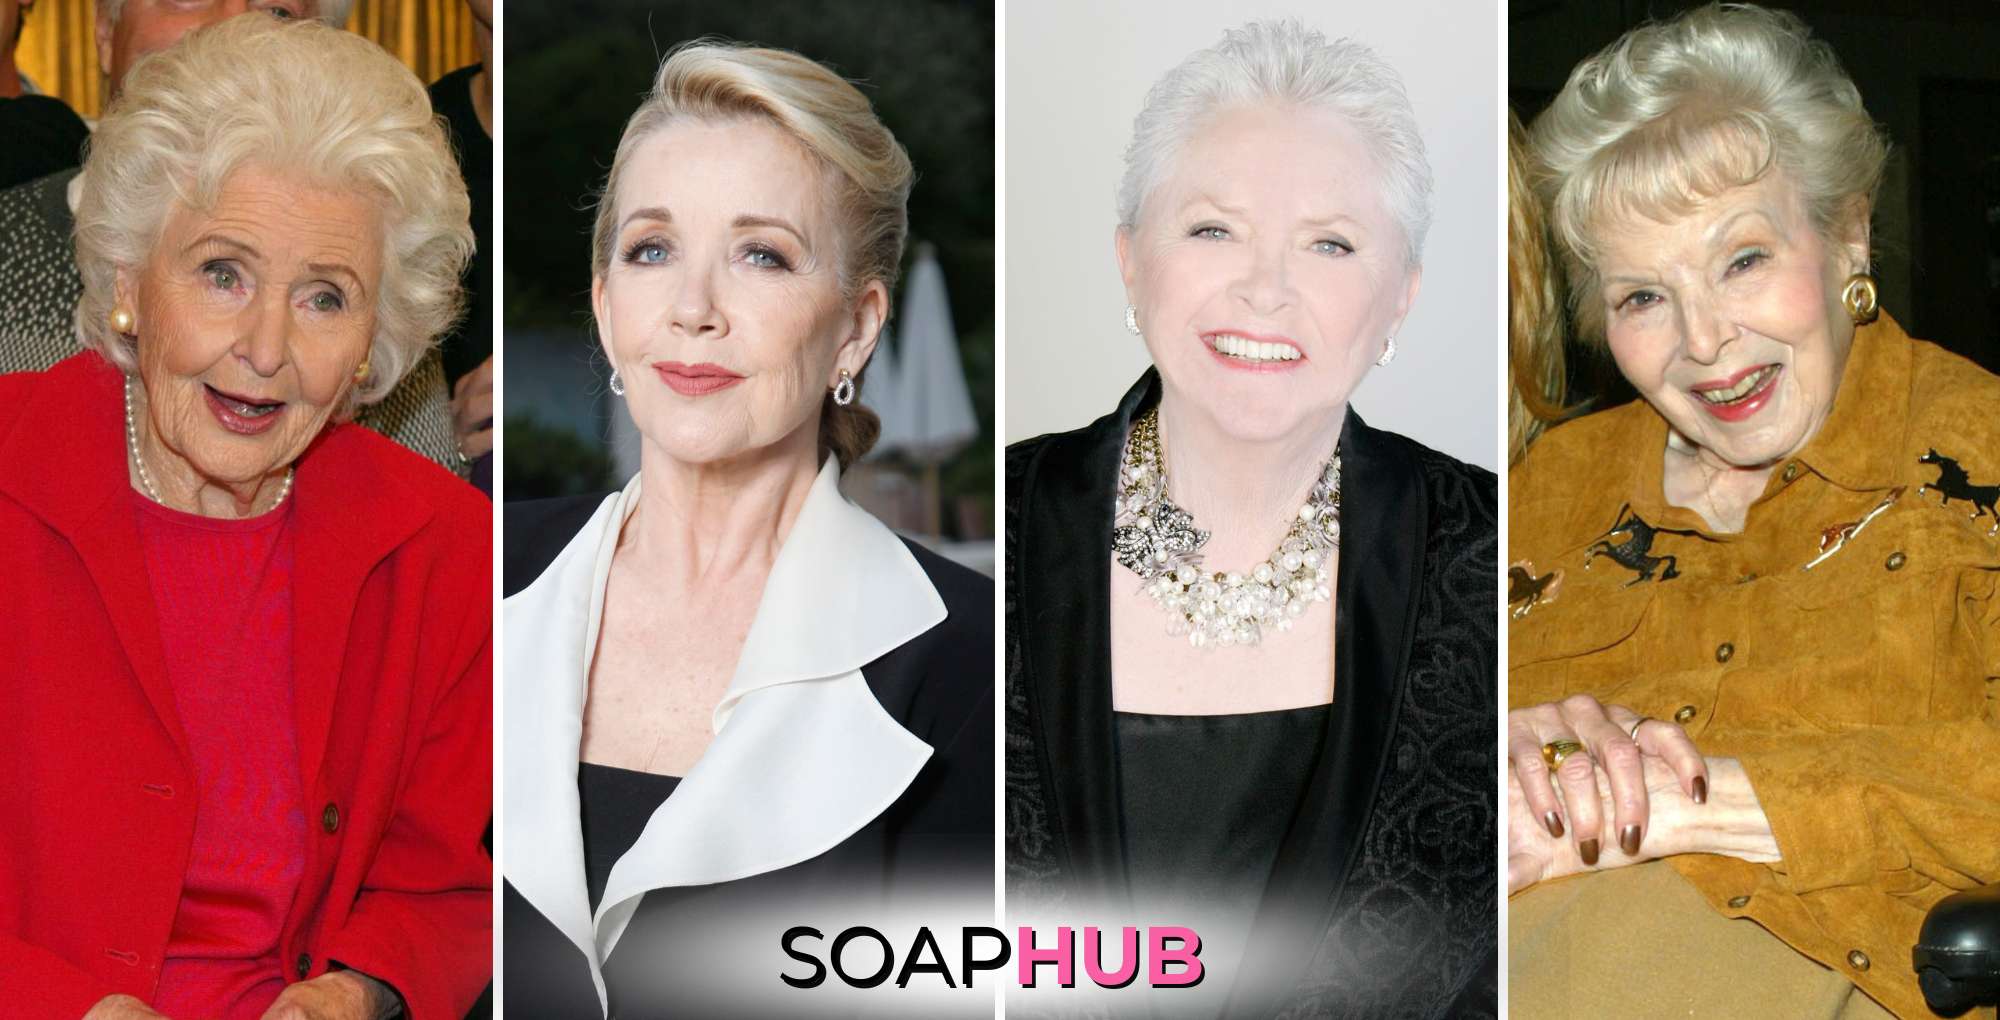 Days of our Lives Francis Reid, The Young and the Restless Melody Thomas Scott, The Bold and the Beautiful Susan Flannery, General Hospital Anna Lee with the Soap Hub logo.